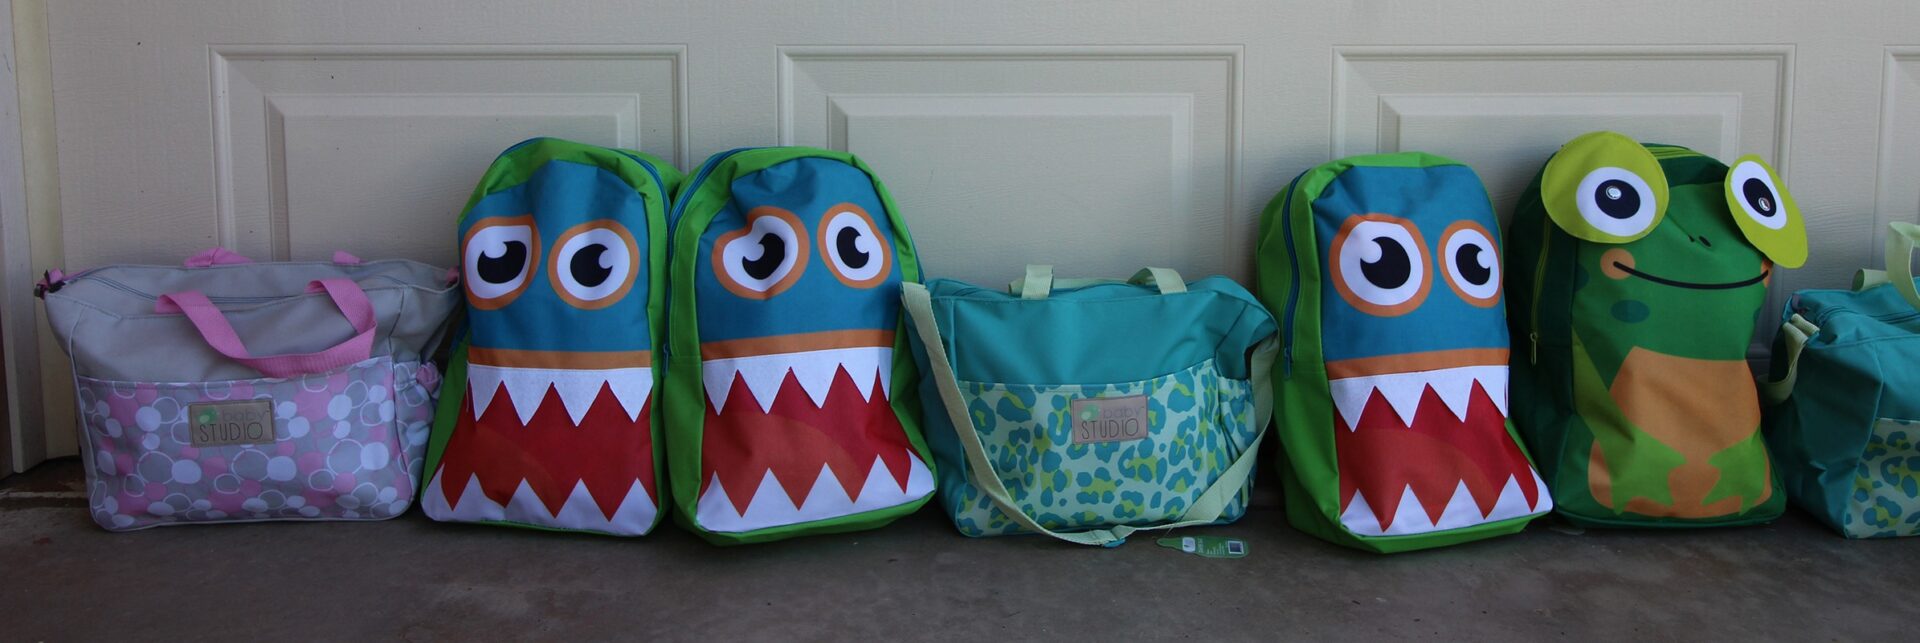 bags-for-kids-face-bags